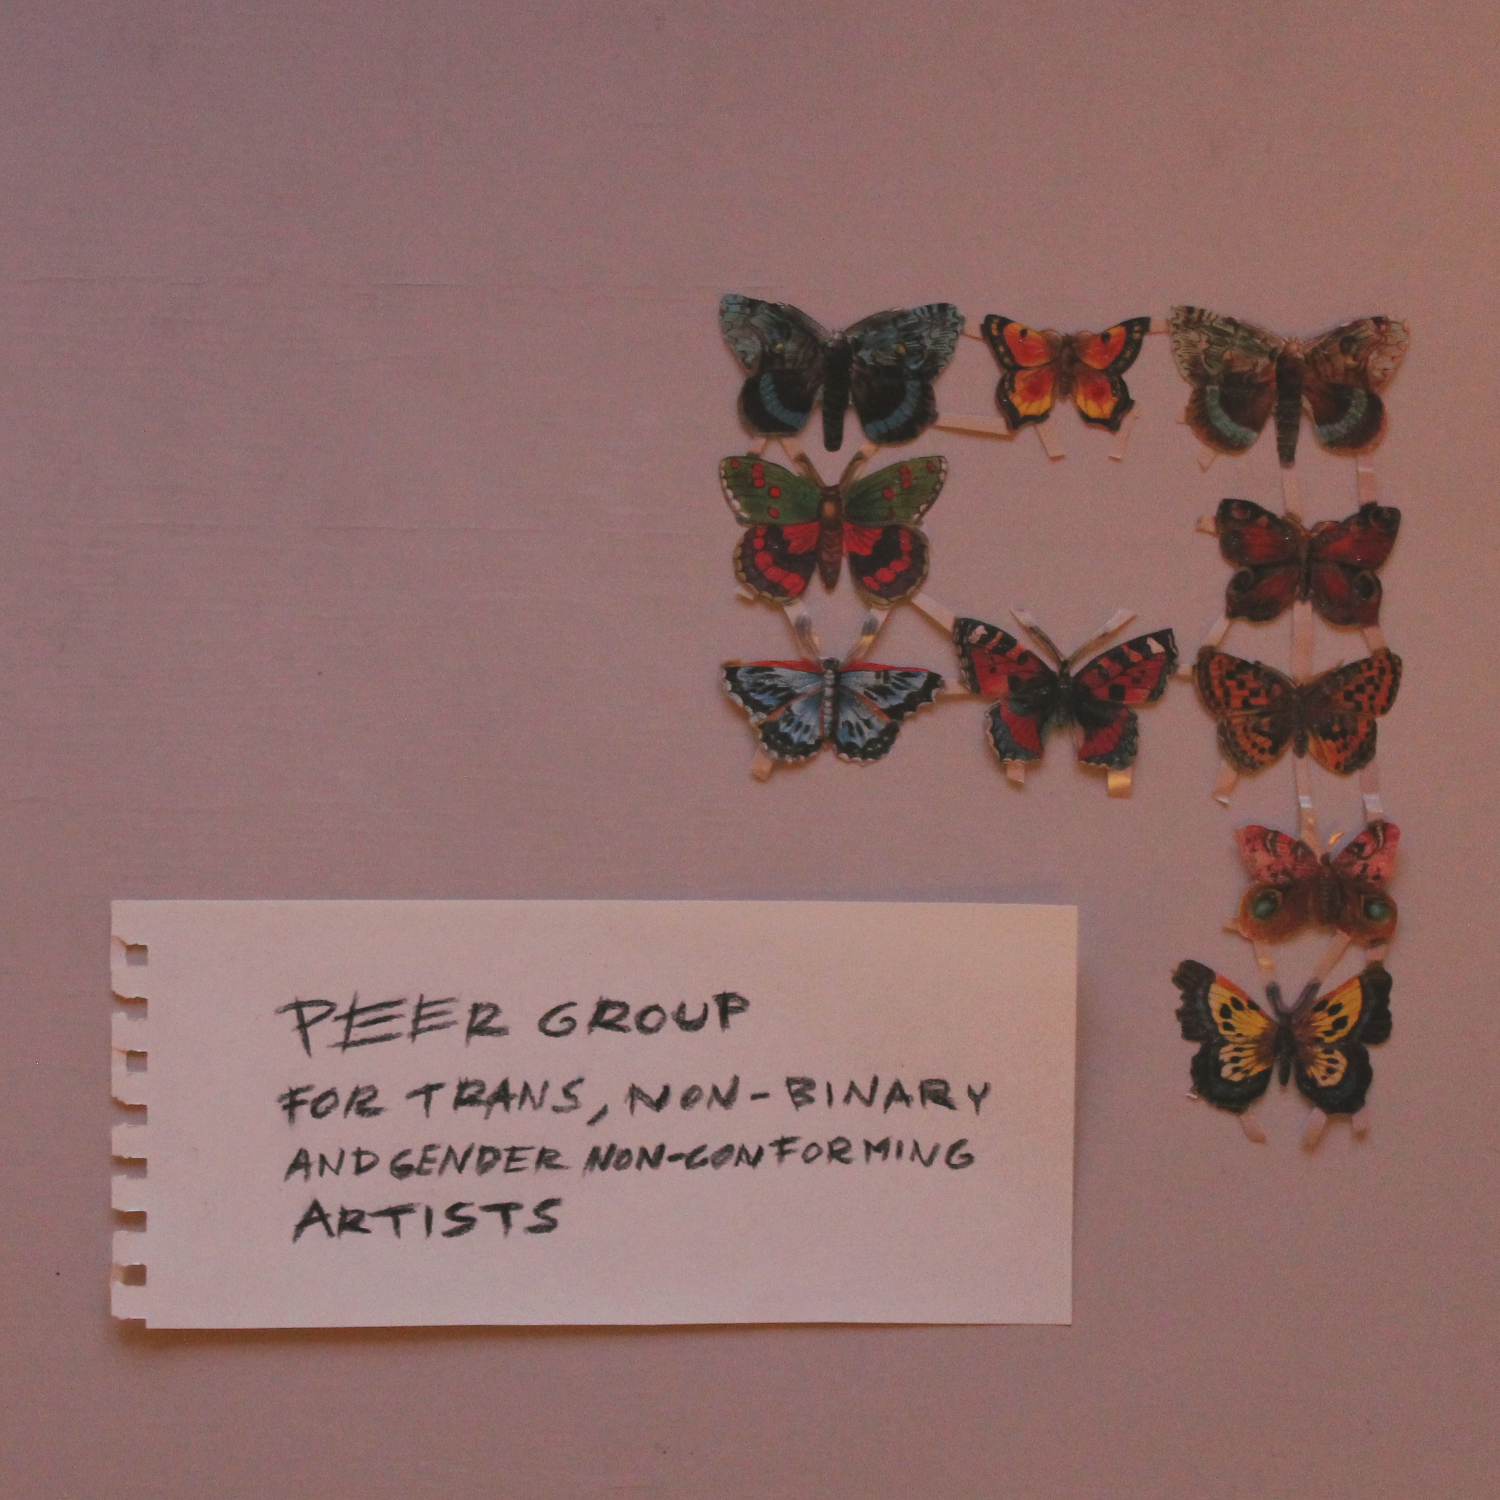 a collage by Pihla Lehtinen, pink background and white piece of paper with the group name written by hand. Above this, paper butterflies of different colours